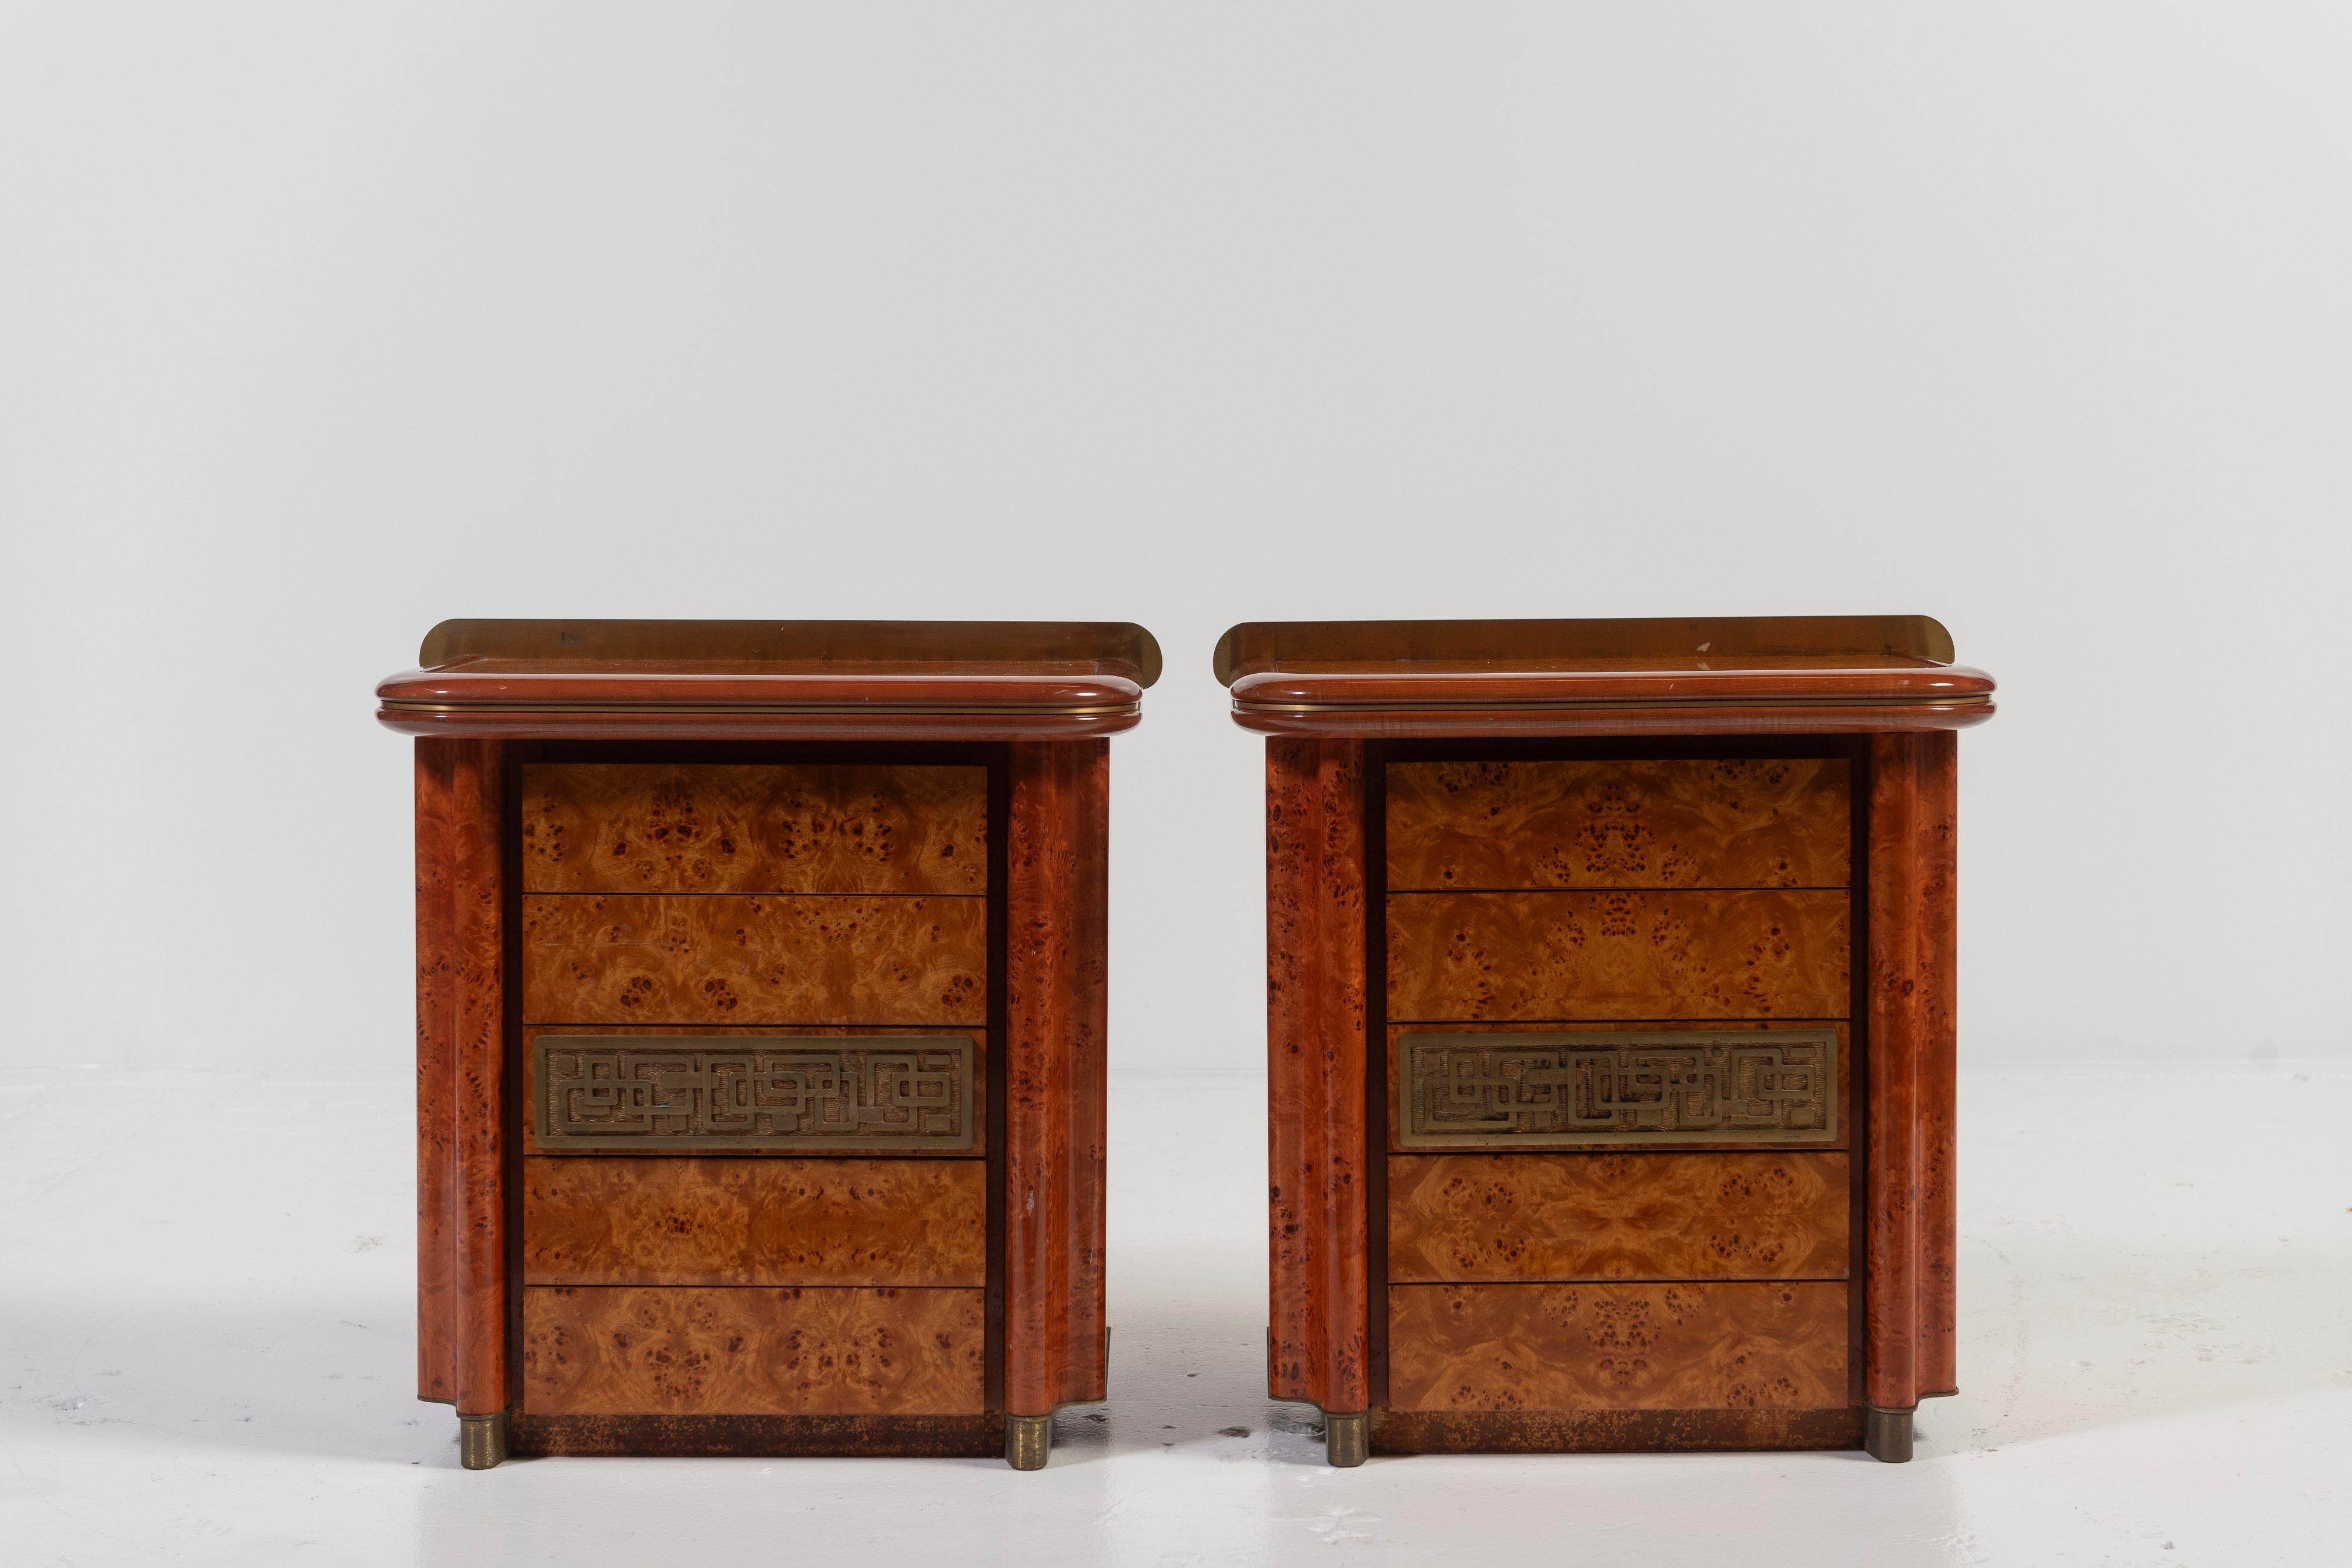 Solid burl, brass and bronze vintage nightstands, by Italian Luciano Frigerio, are listed only as a pair. Beautifully designed with curved edges and intricate metal accents, the pair has five drawers each offering great storage. The surfaces are in